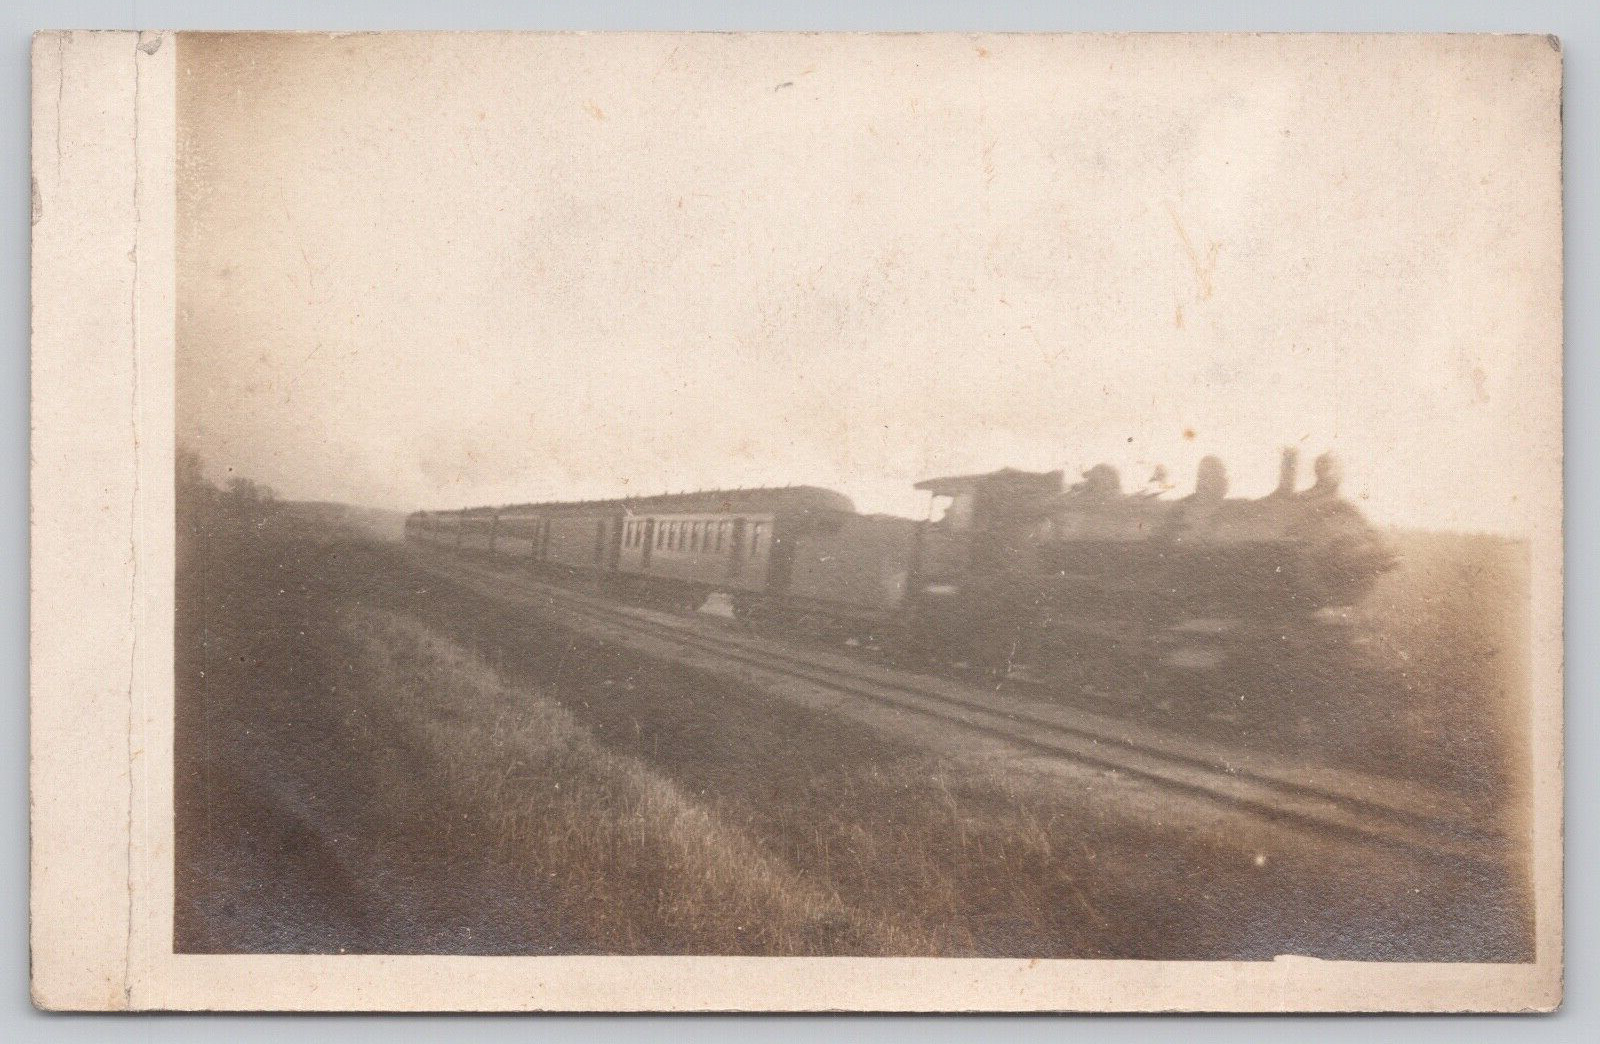 UNIDENTIFIED STEAM ENGINE TRAIN IN MOTION ON RAILROAD TRACKS REAL PHOTO c 1910s